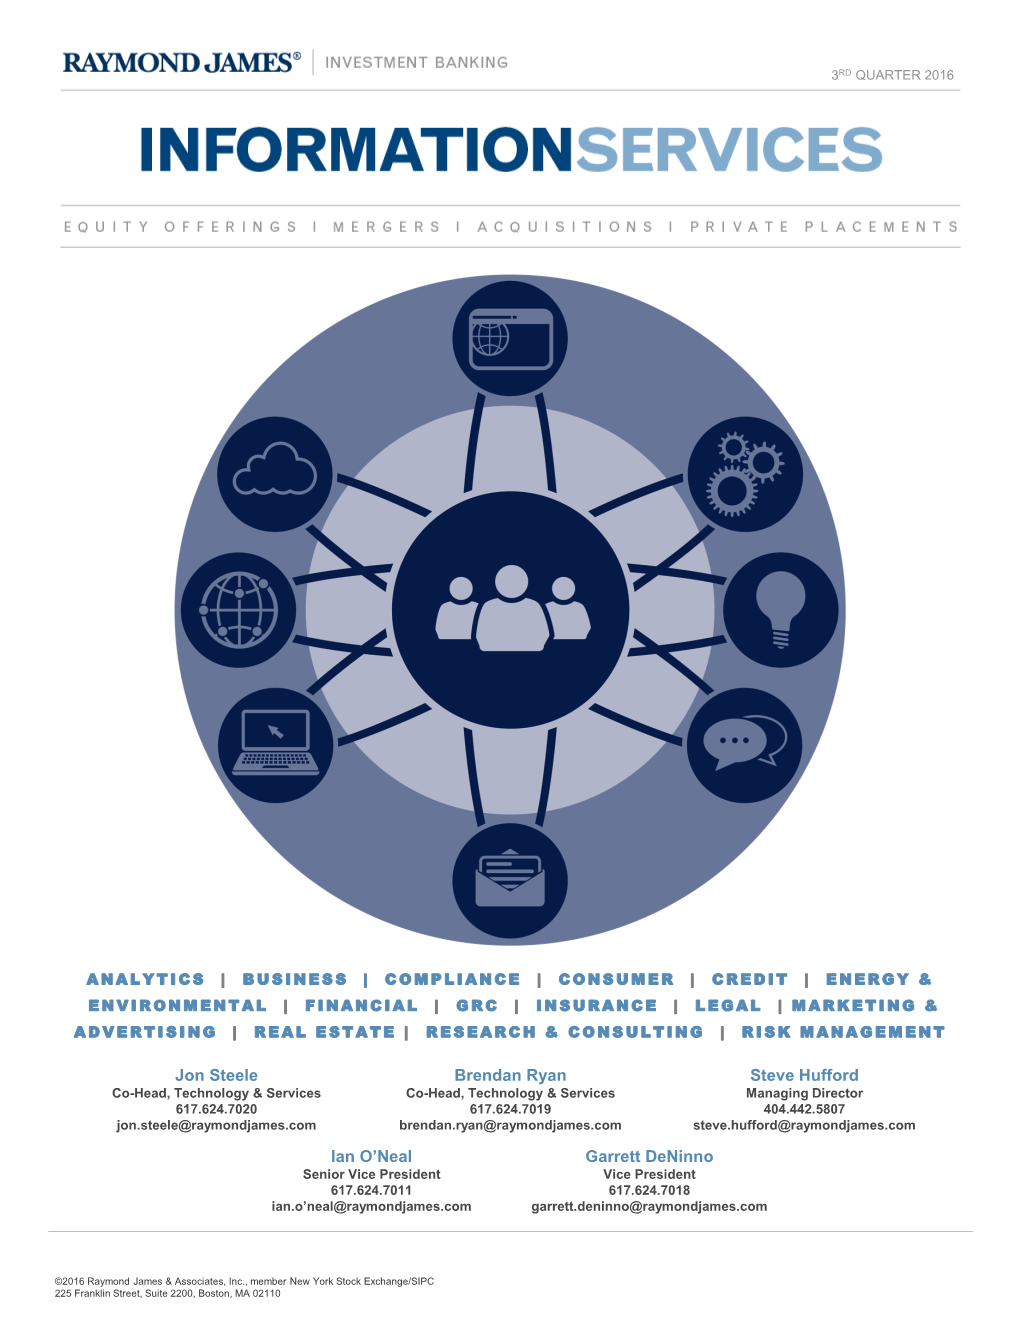 INFORMATION SERVICES QUARTERLY UPDATE Ian O'neal